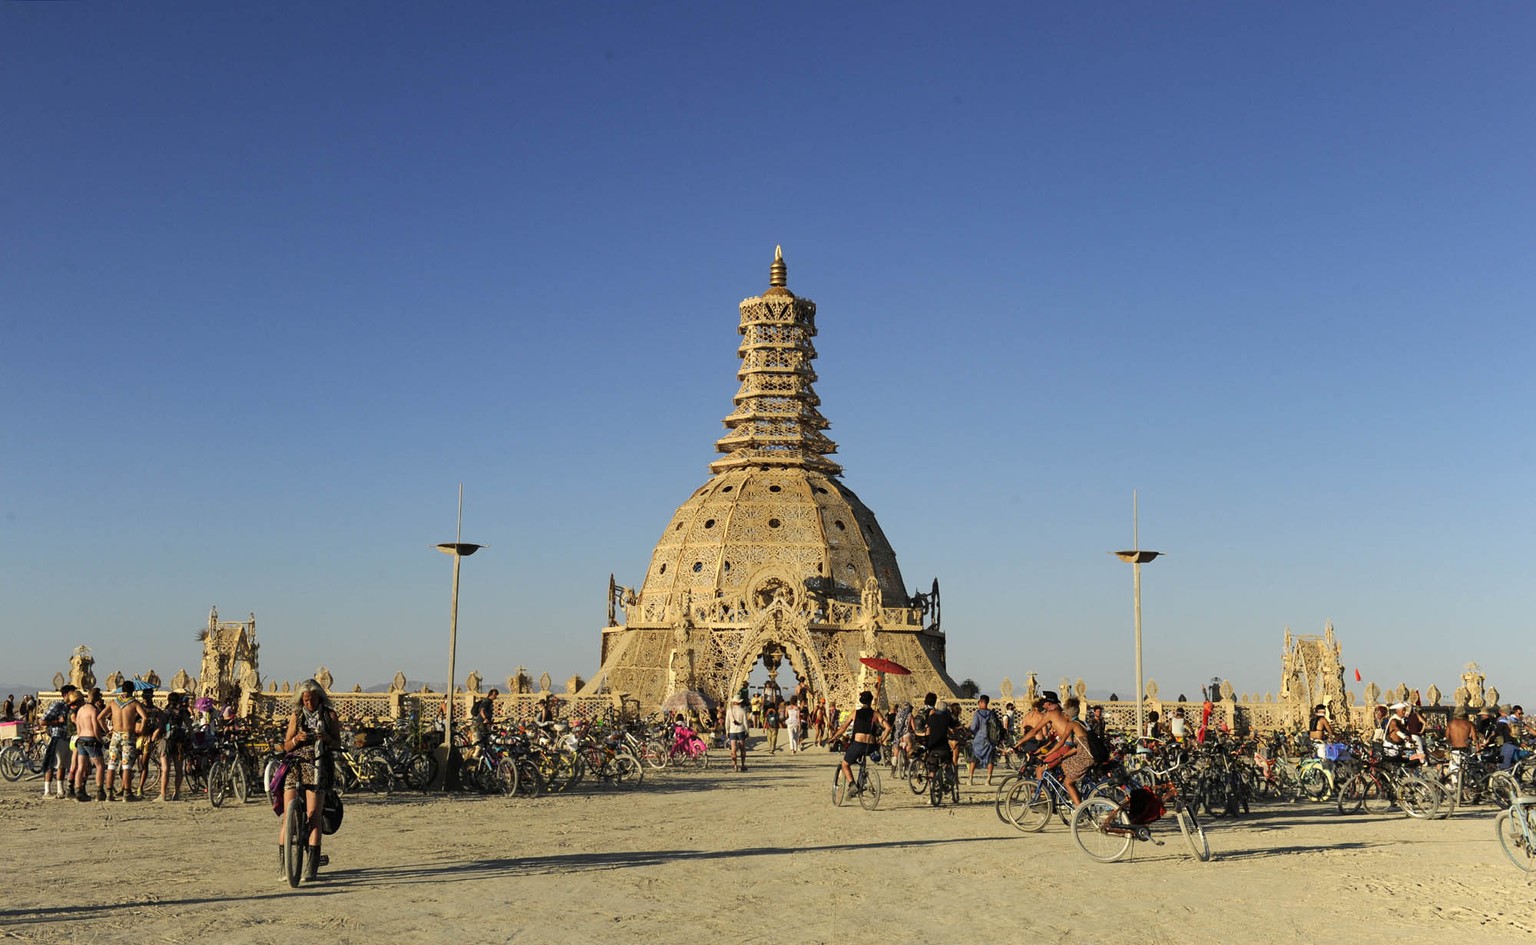 In this Aug. 23, 2014 photo, Burning Man participants gather at the Temple of Grace at the annual Burning Man event on the Black Rock Desert of Gerlach, Nev. (AP Photo/The Reno Gazette-Journal, Andy B ...